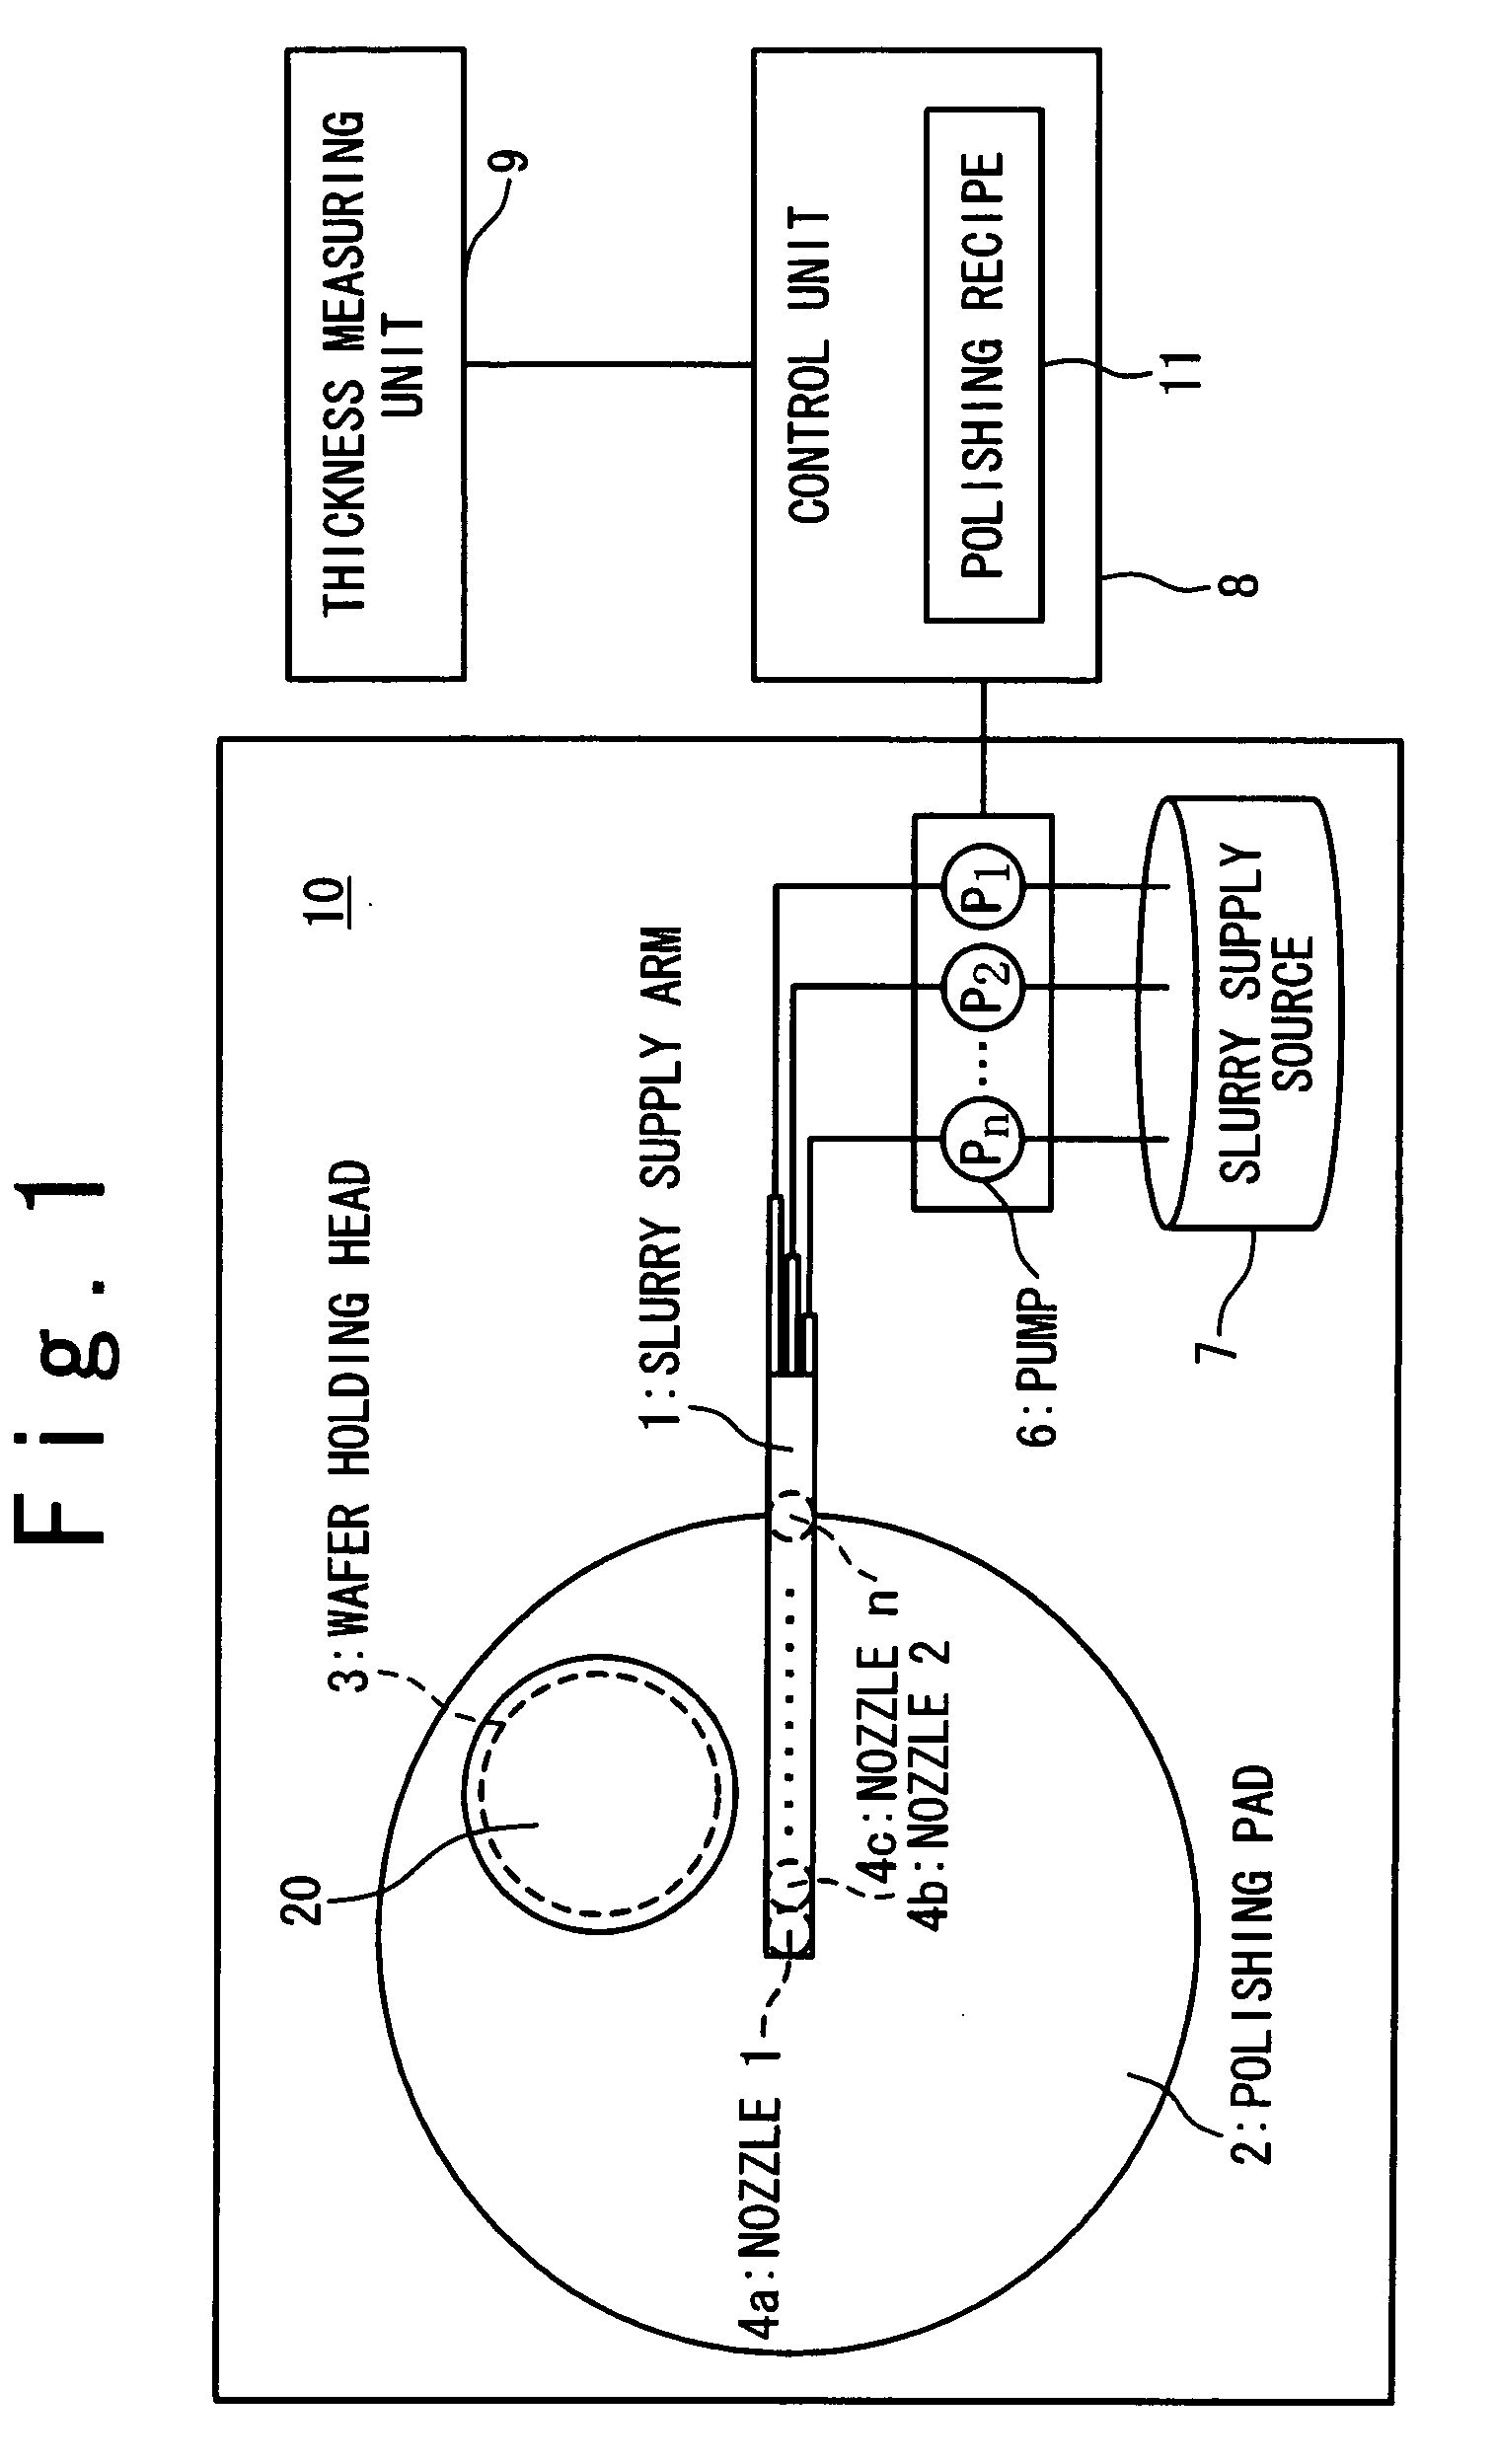 Polishing apparatus and method of controlling the same